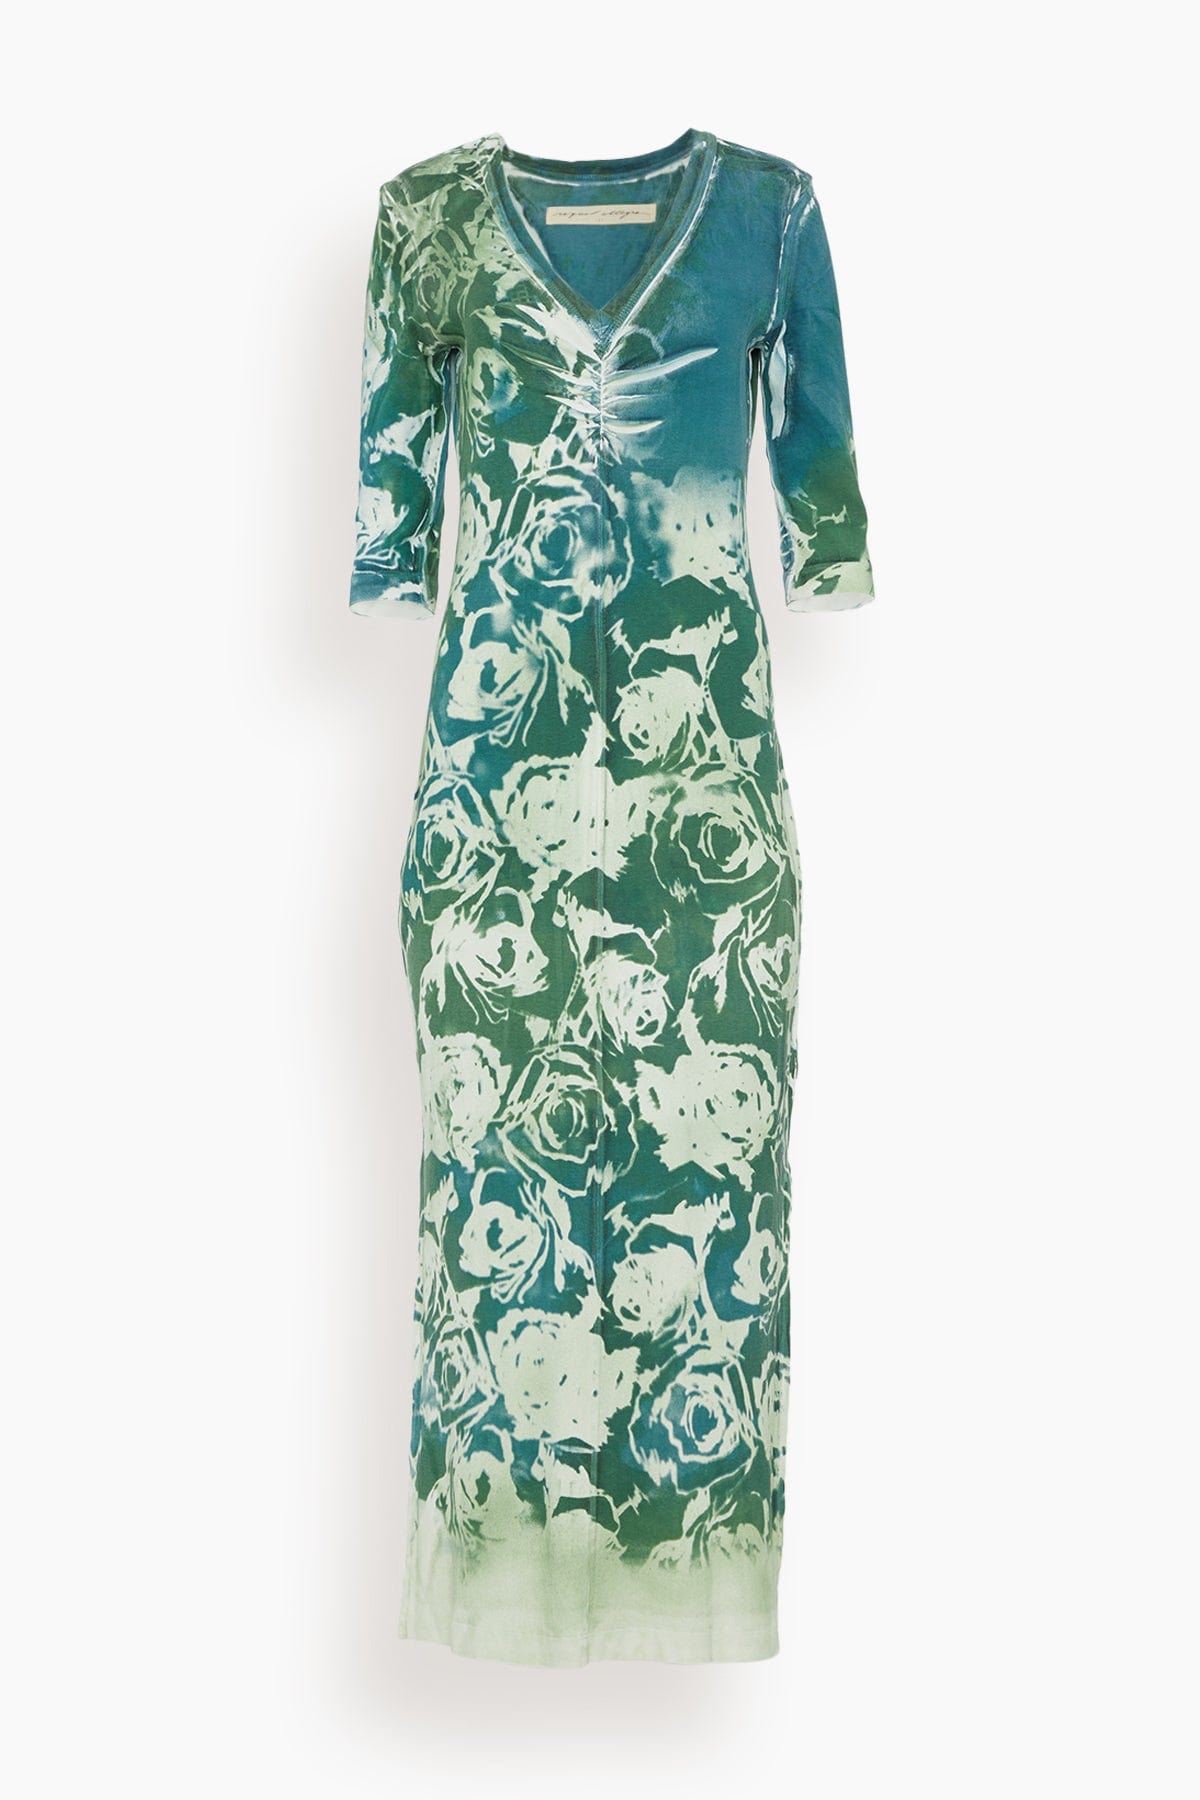 Raquel Allegra Dresses Bailey Dress in Teal Army Rose